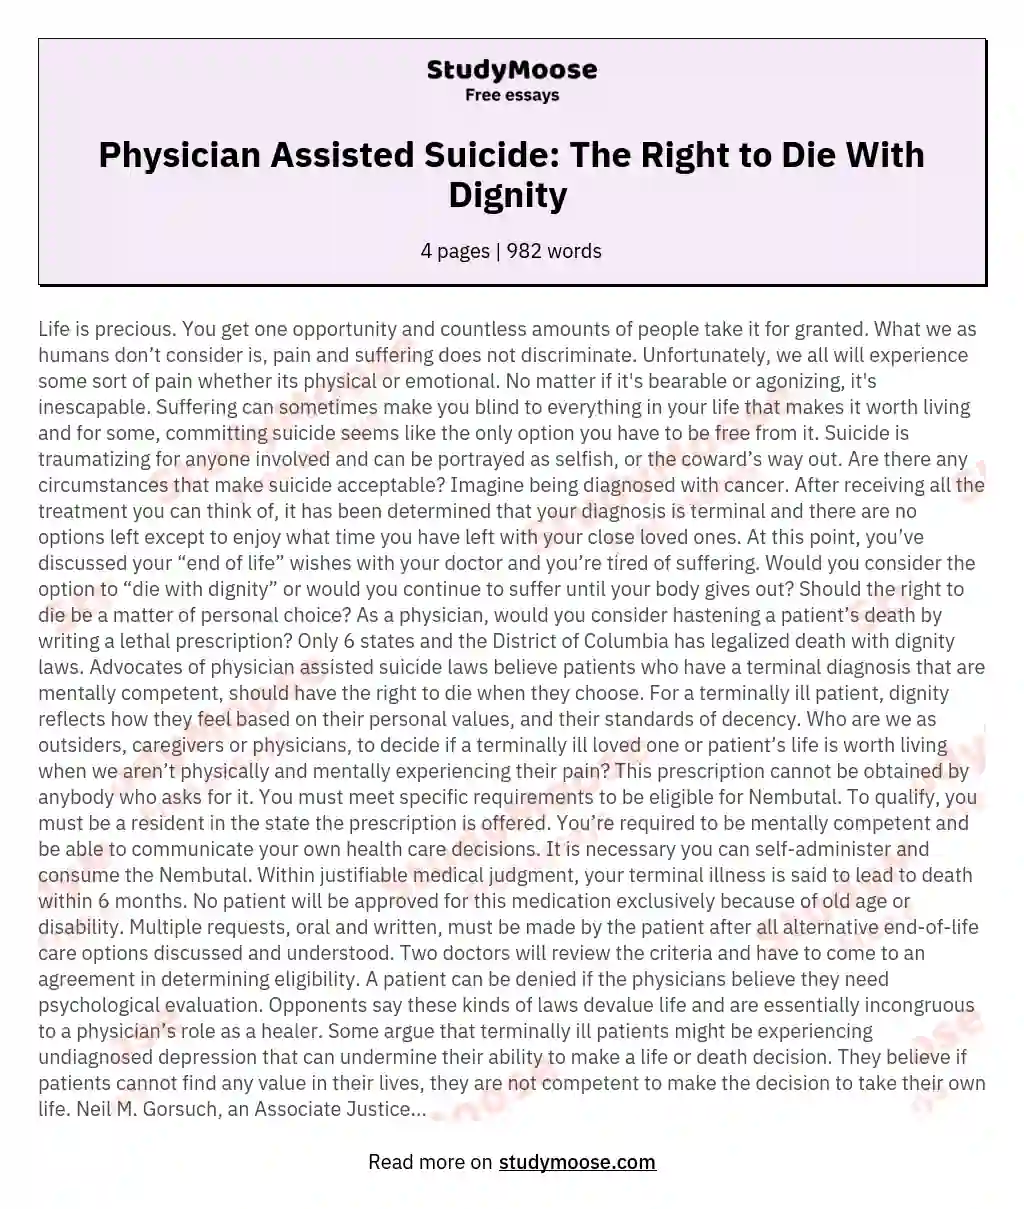 Physician Assisted Suicide: The Right to Die With Dignity 